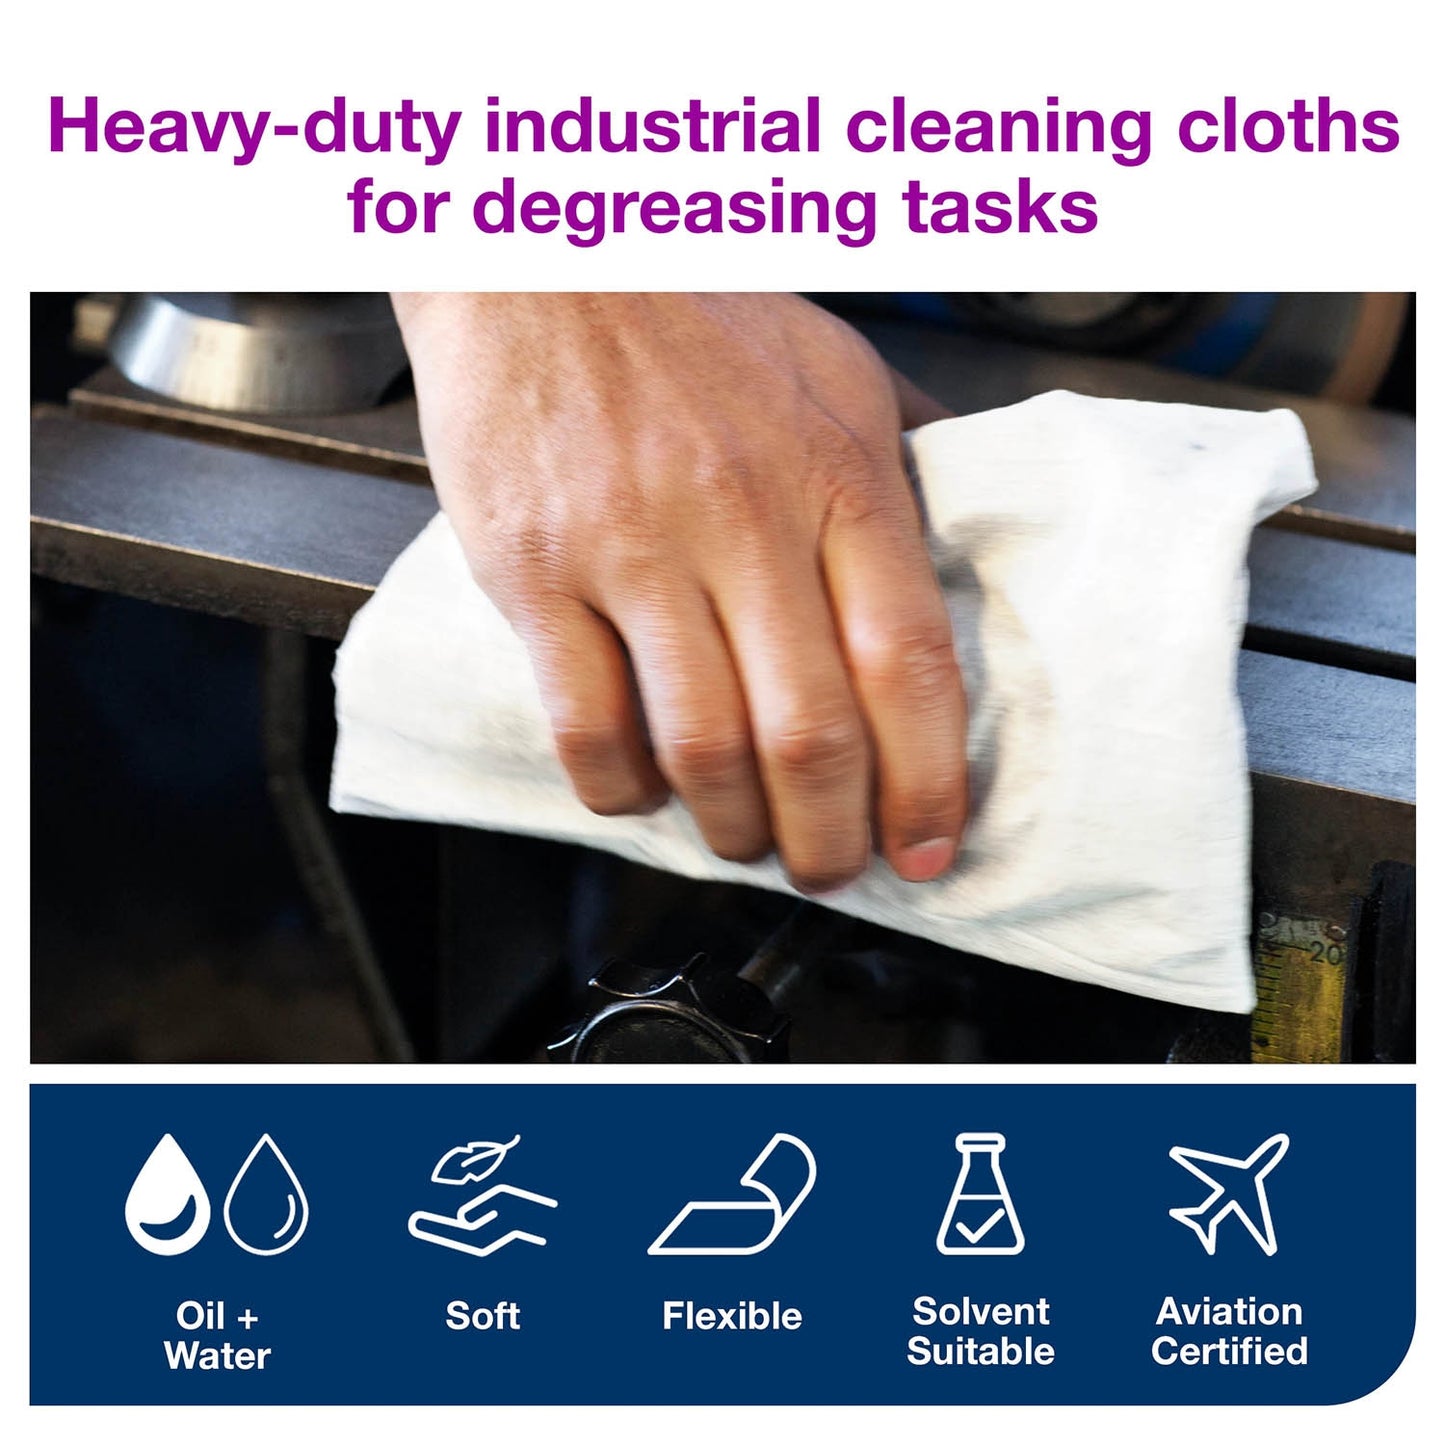 Tork Heavy Duty Cleaning Cloth White 1Ply - 530137 - 1 x 280 Sheets